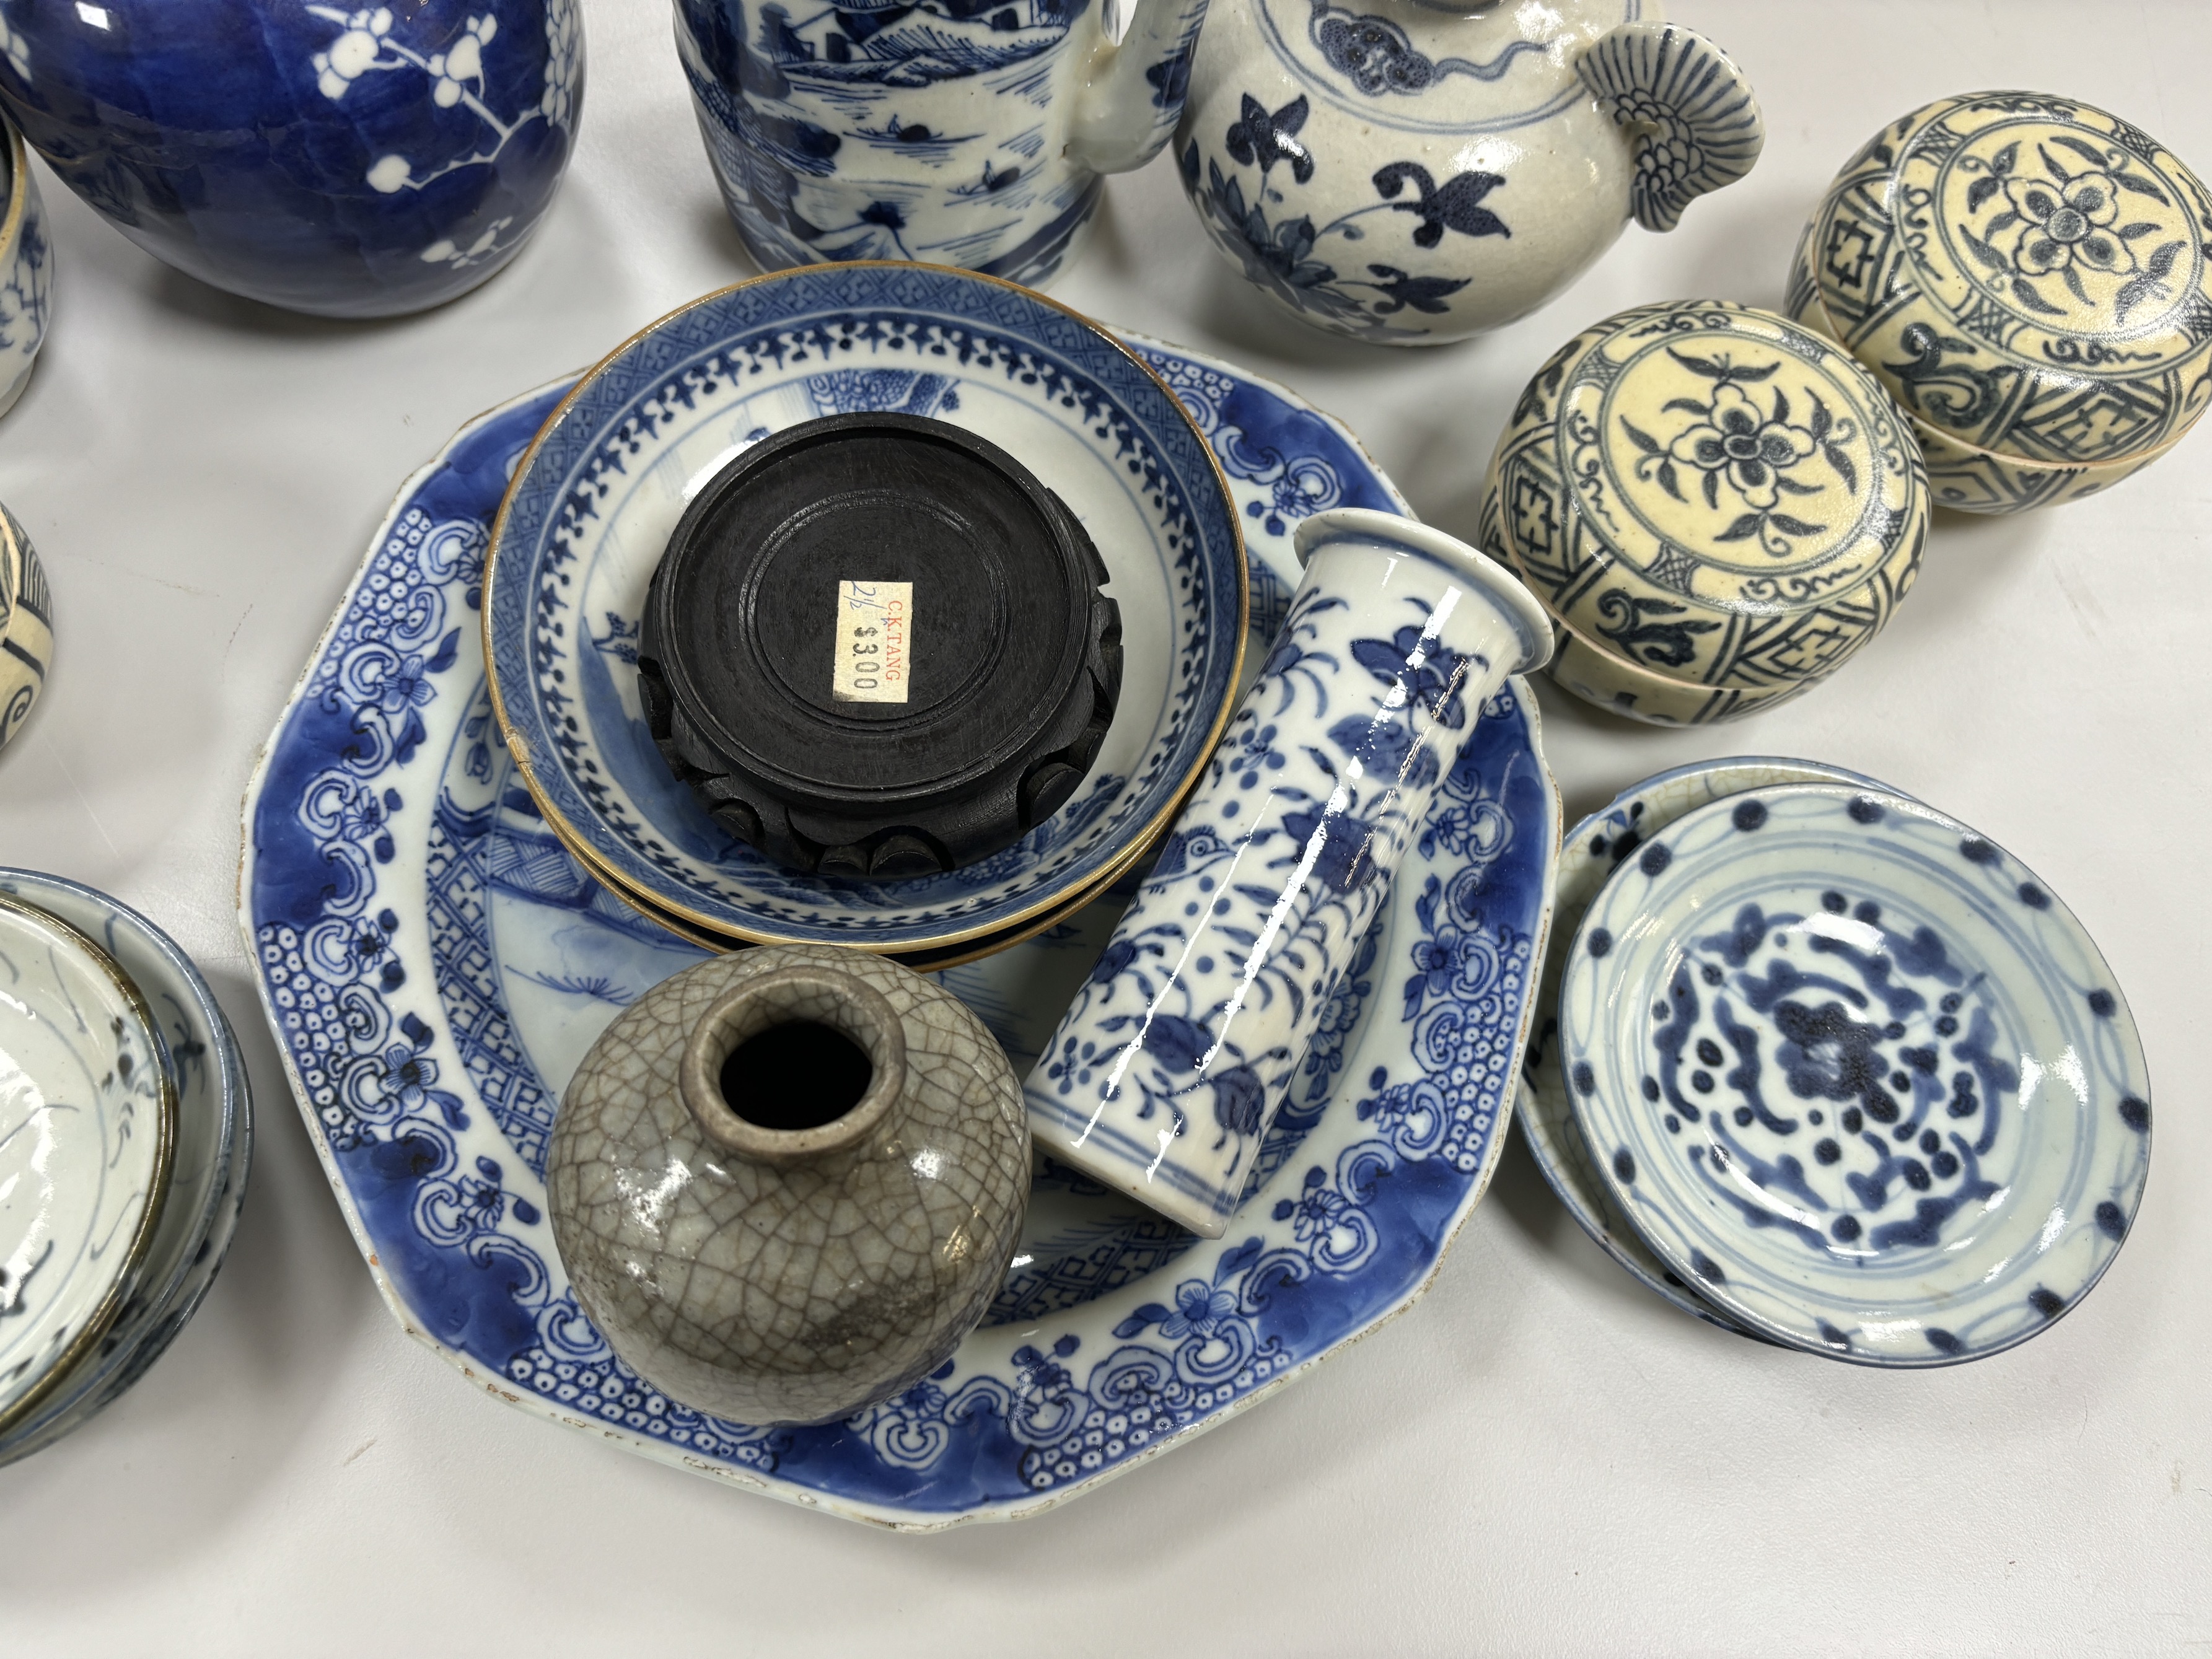 A quantity of Chinese and Annamese blue and white ceramics, 19th century and later - Image 2 of 6